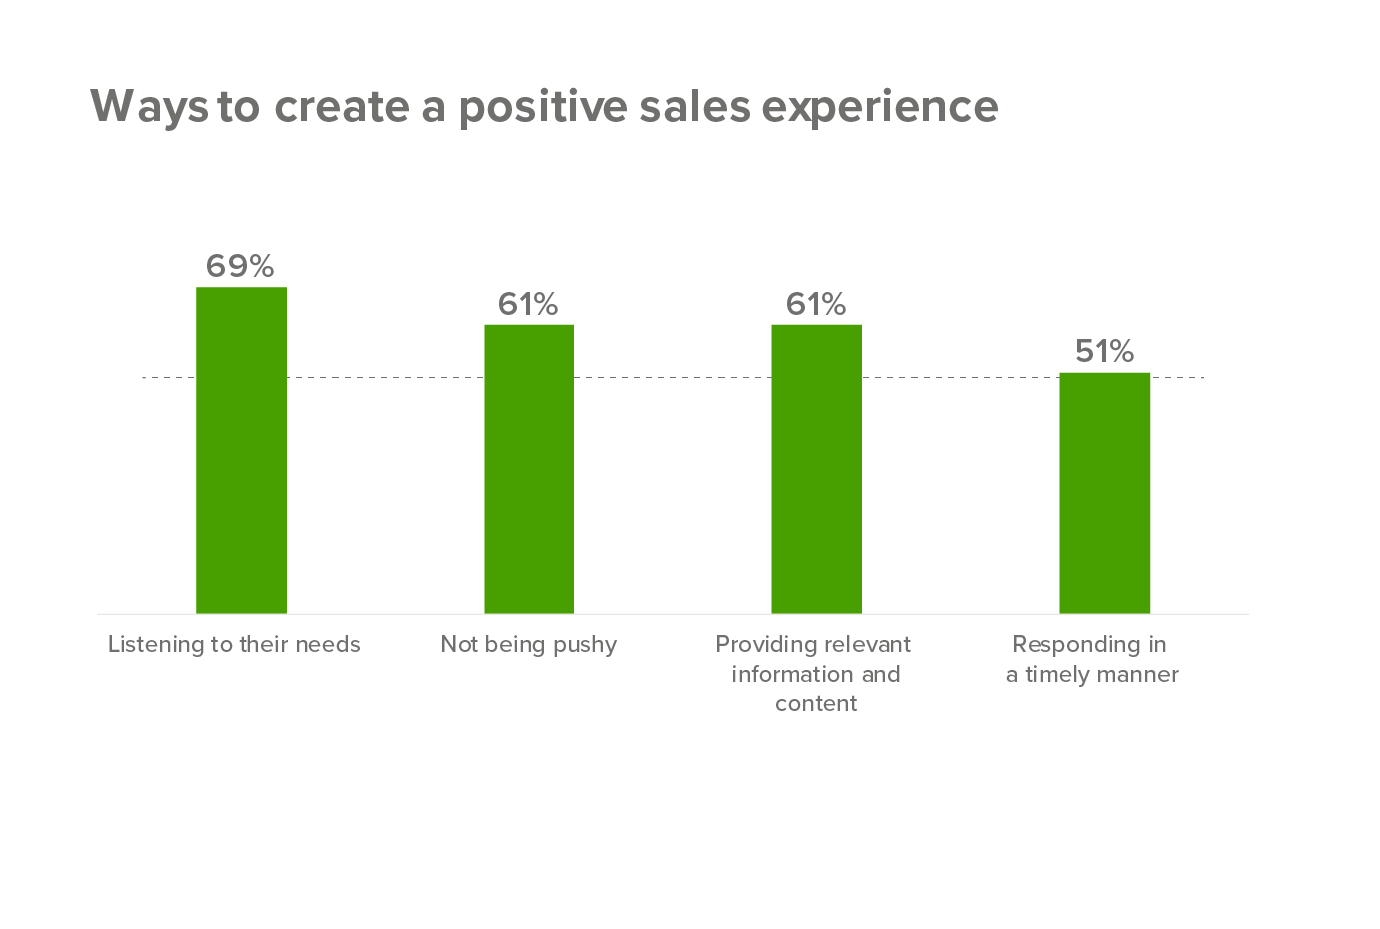 How to create a positive sales experience